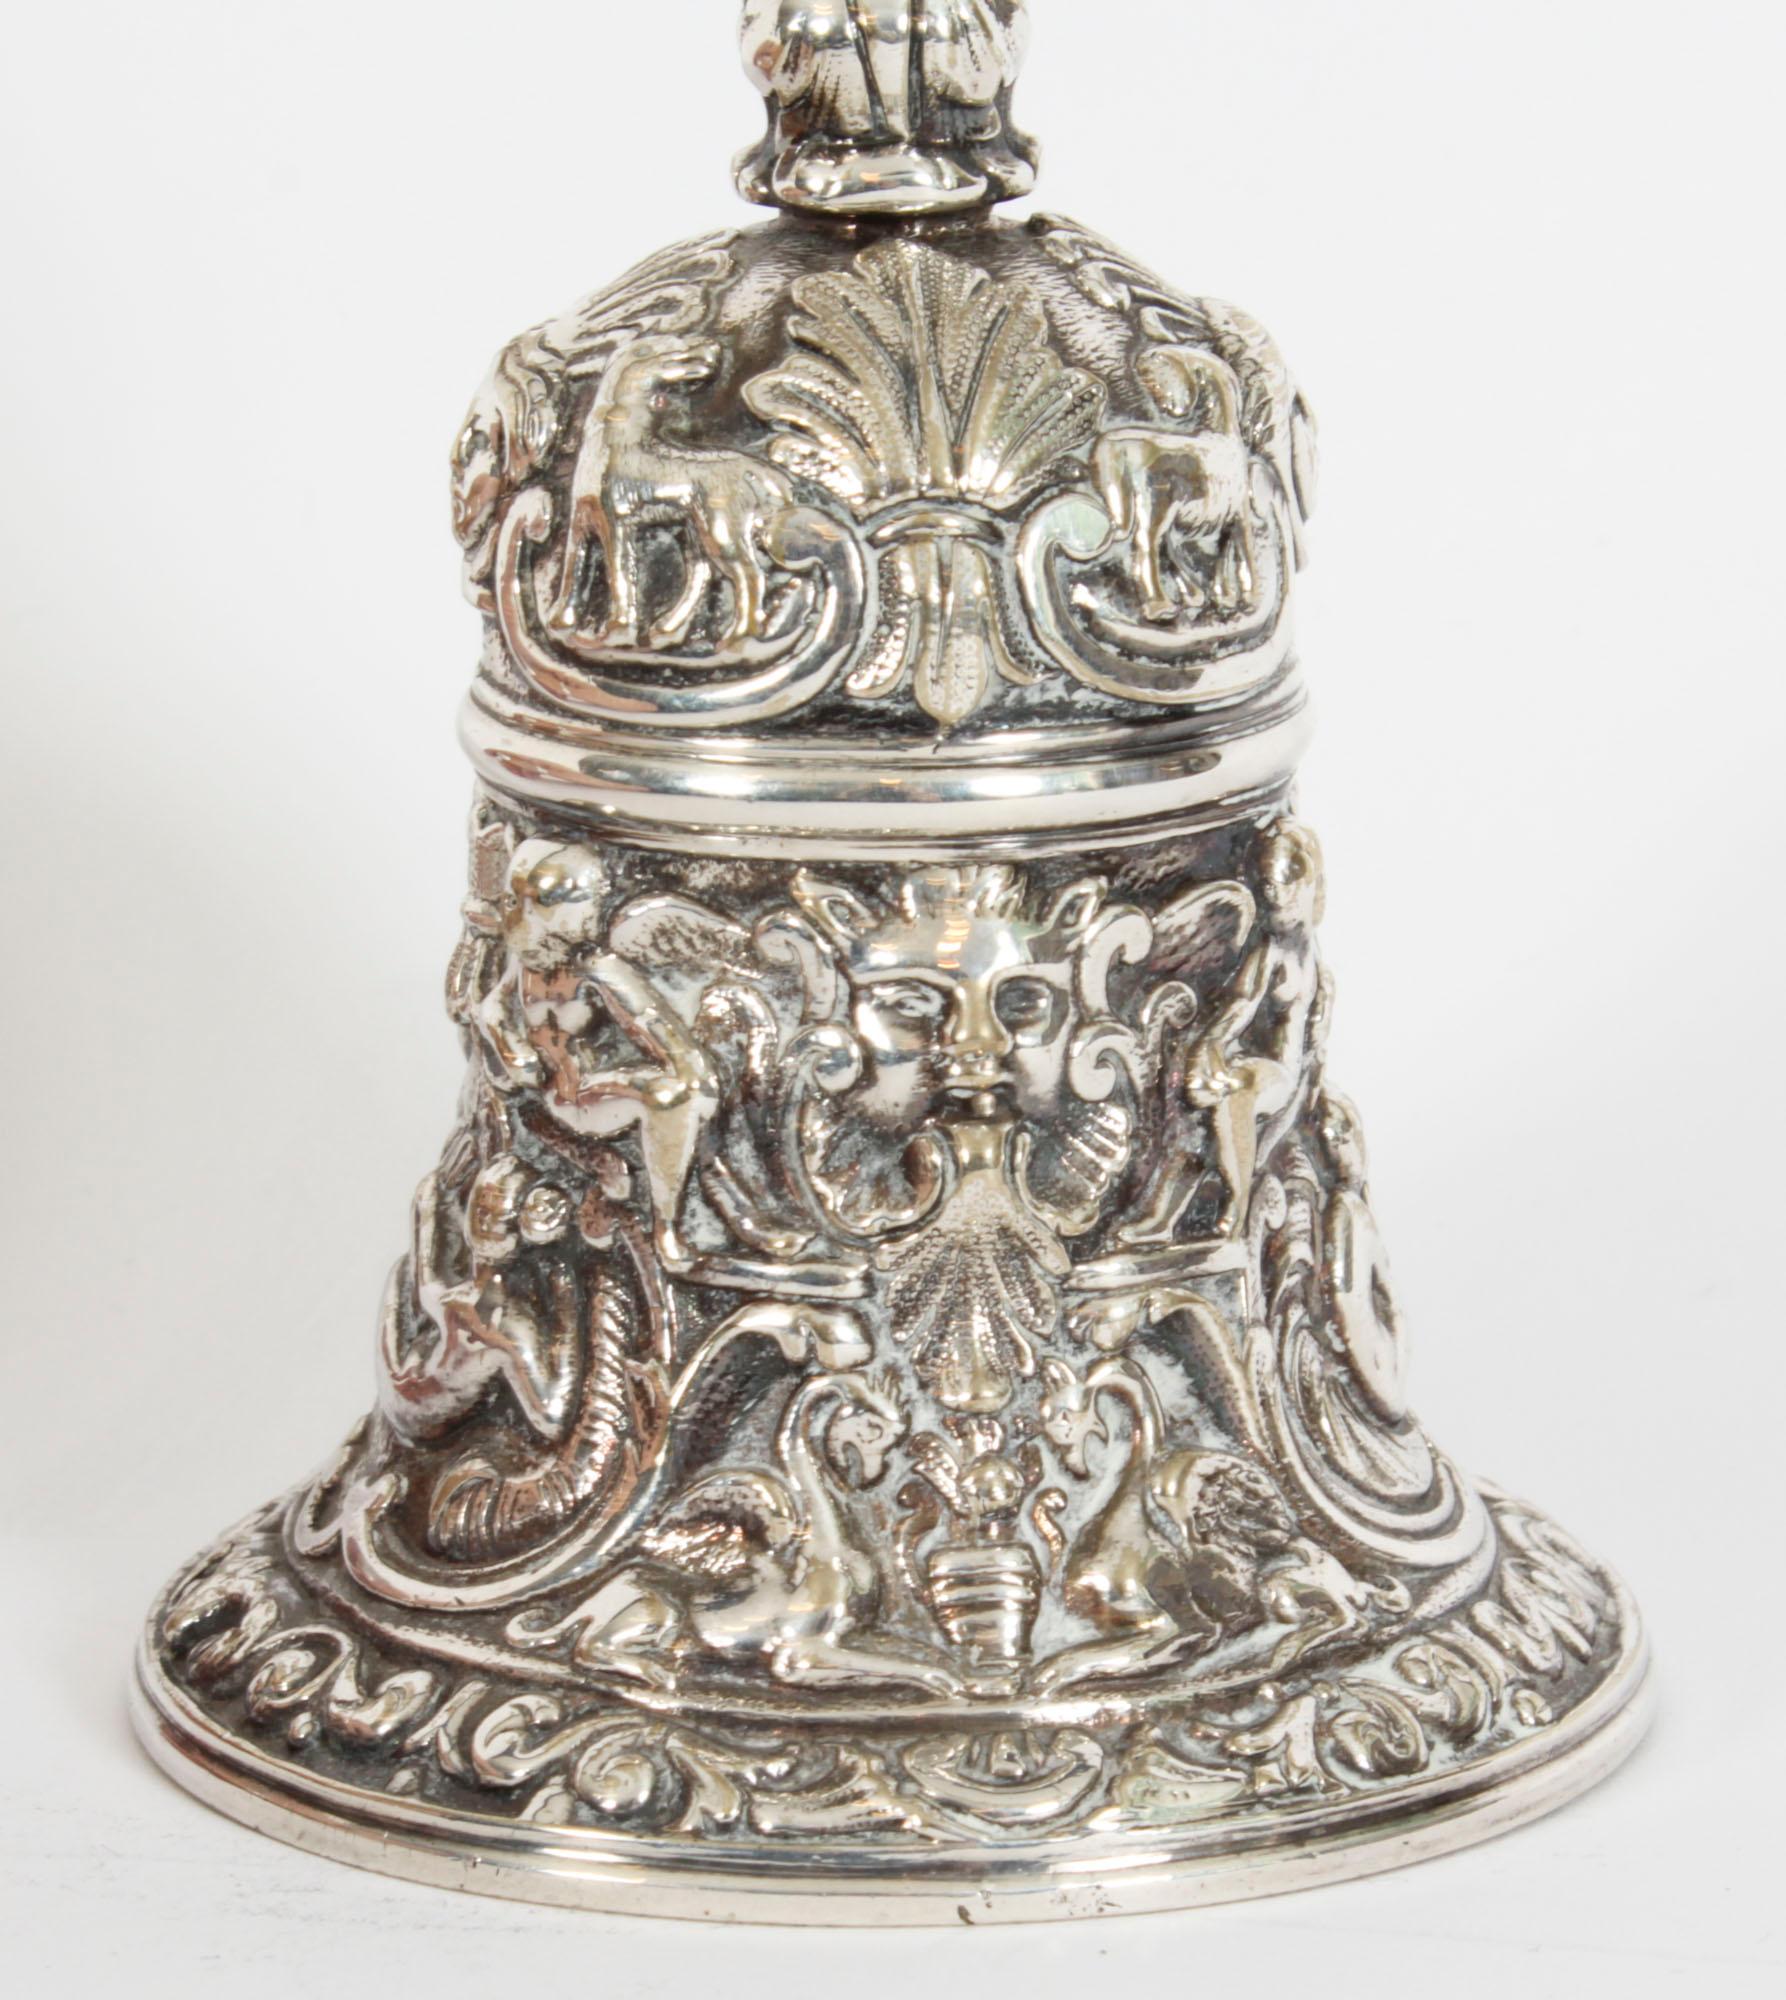 Antique Silver Plated Hand Bell Renaissance Revival 19th Century 5